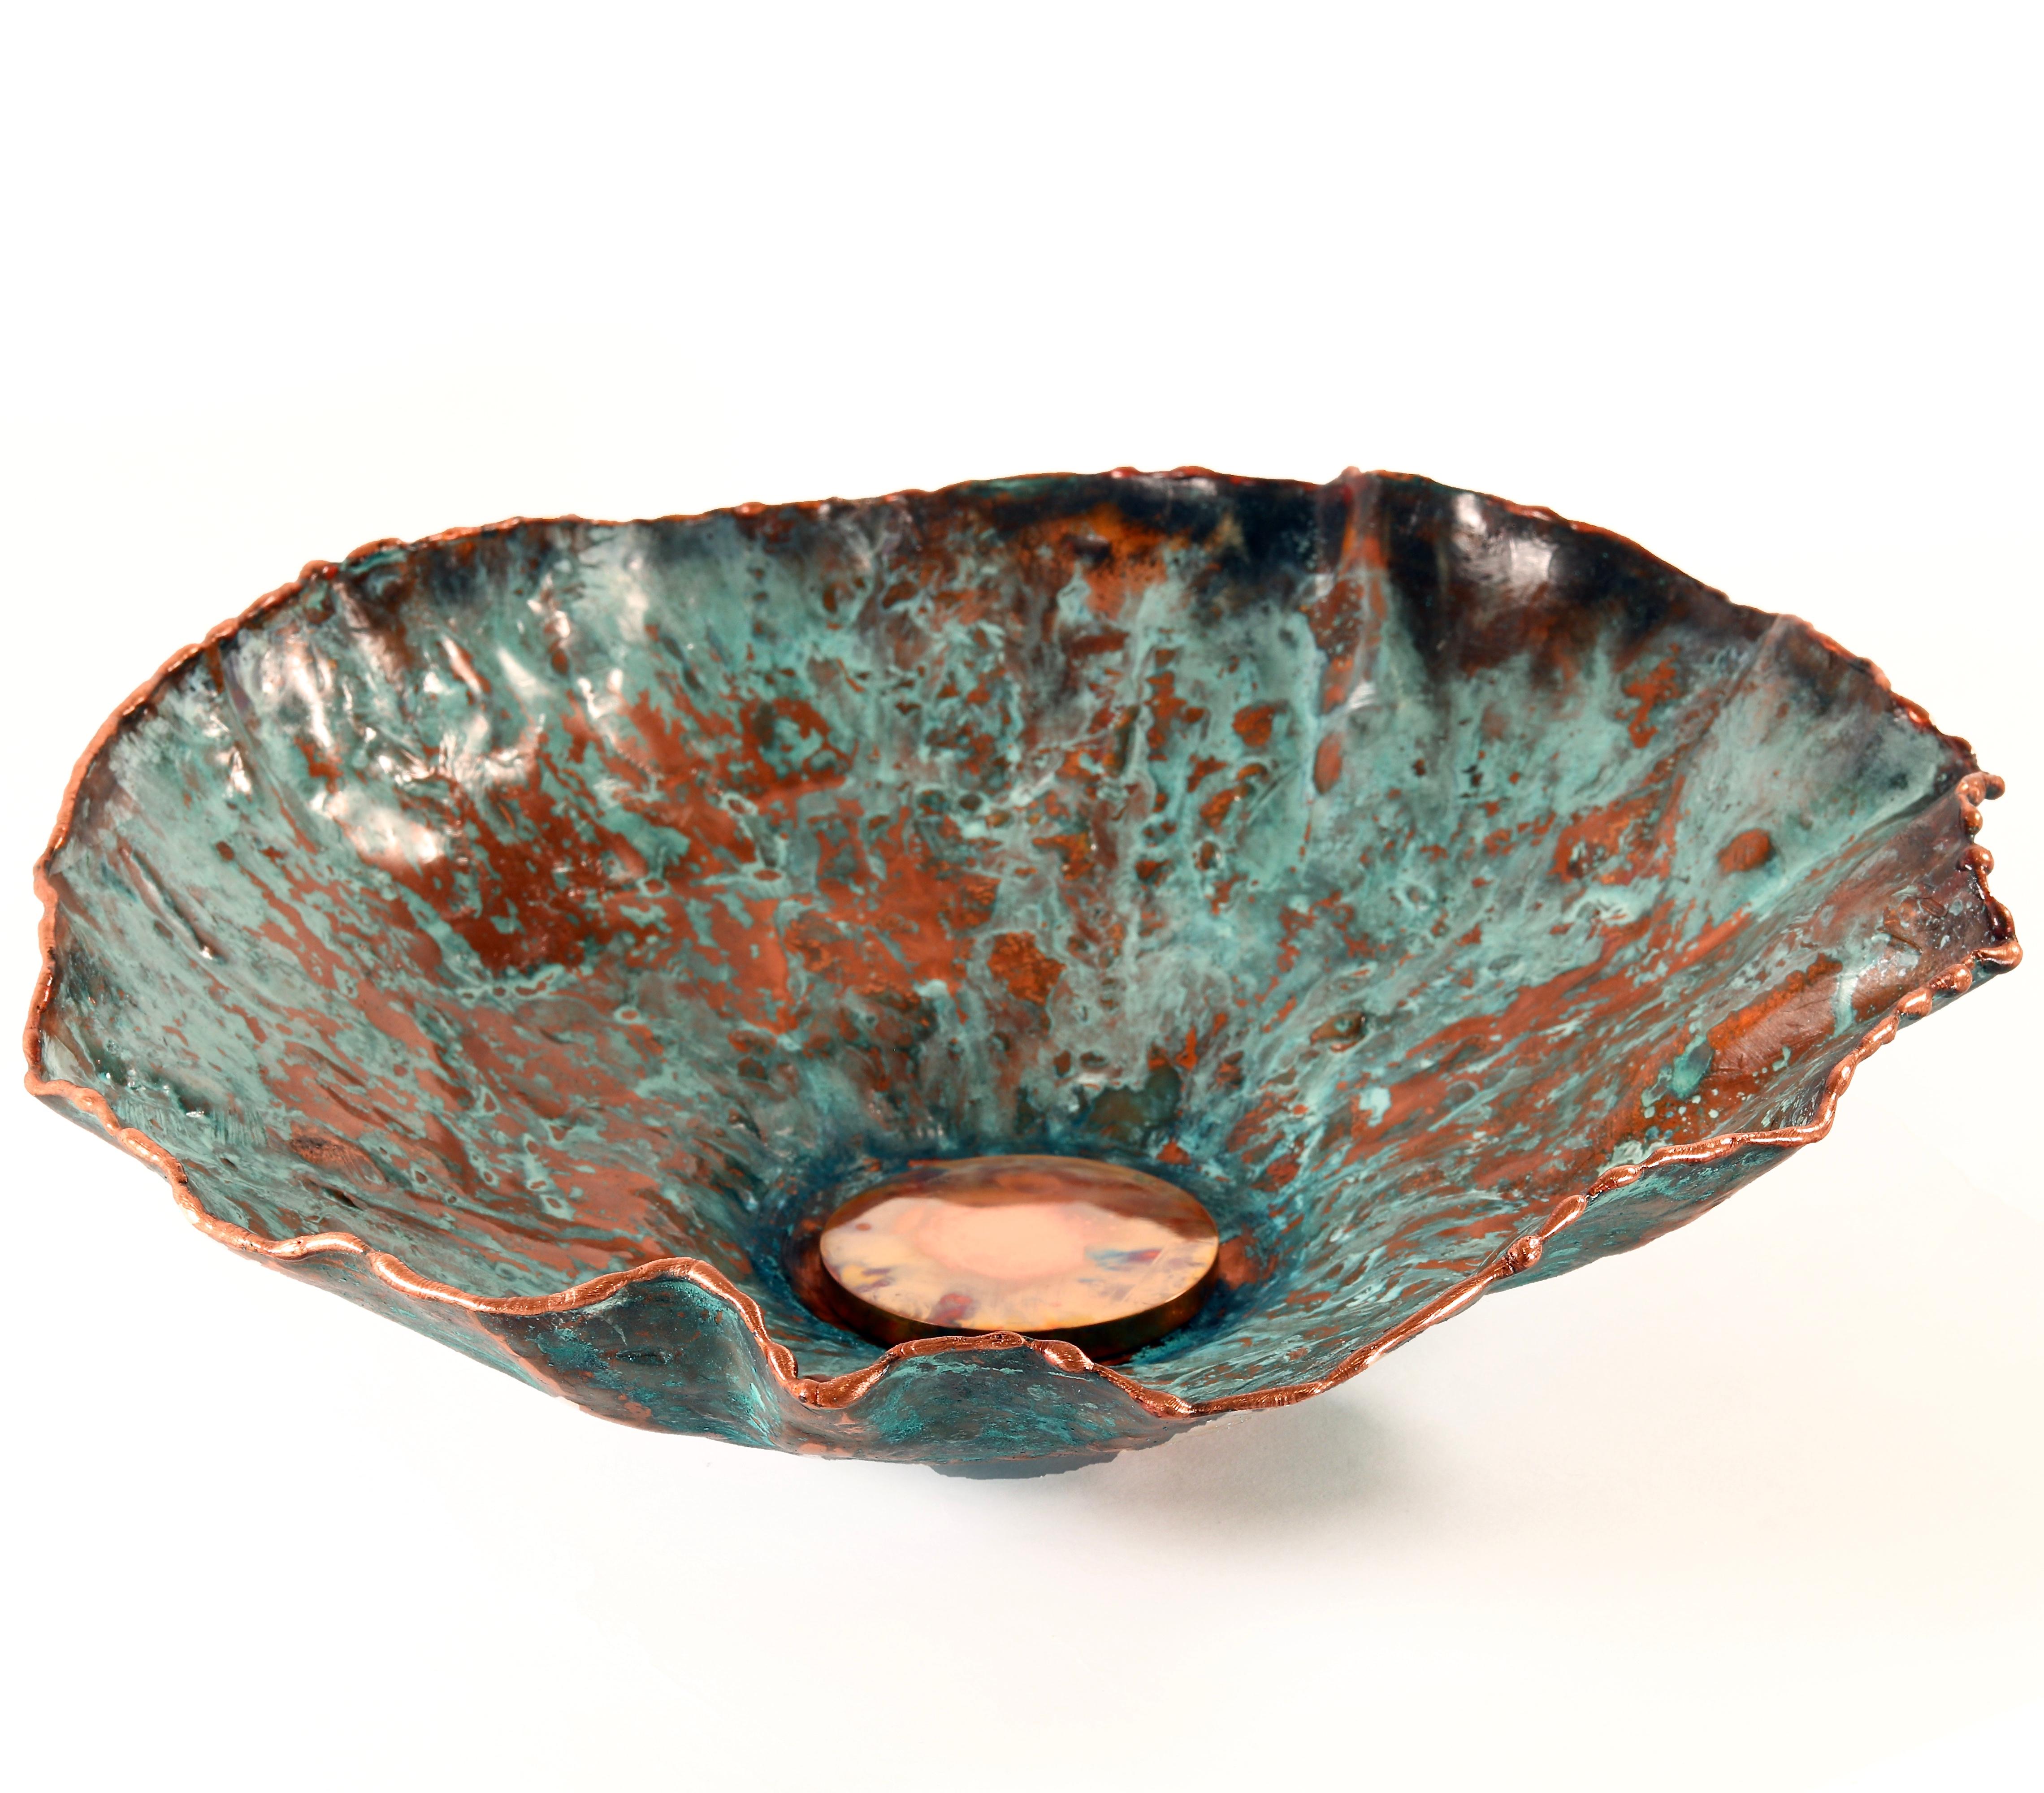 Hypomea copper bowl by Samuel Costantini
Dimensions: D25 x H8 cm
Materials: copper

Copper bowl worked en-rely by hand.
The oxydation of copper is realized only with natural product.
Limited editon of 9 numerated pieces.

Samuel